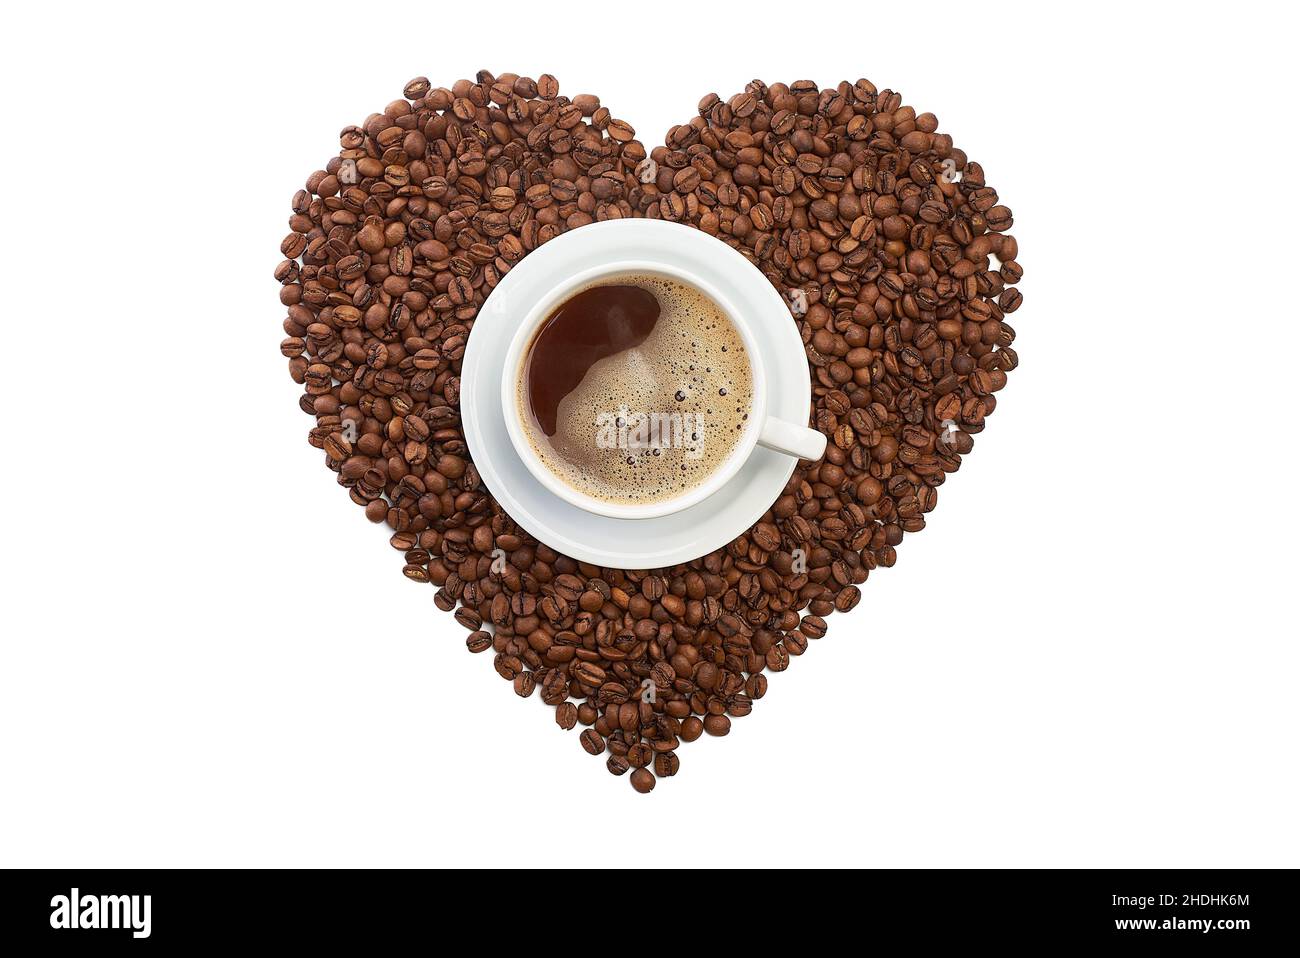 Heart shape from coffee beans with cup of coffee on white Stock Photo